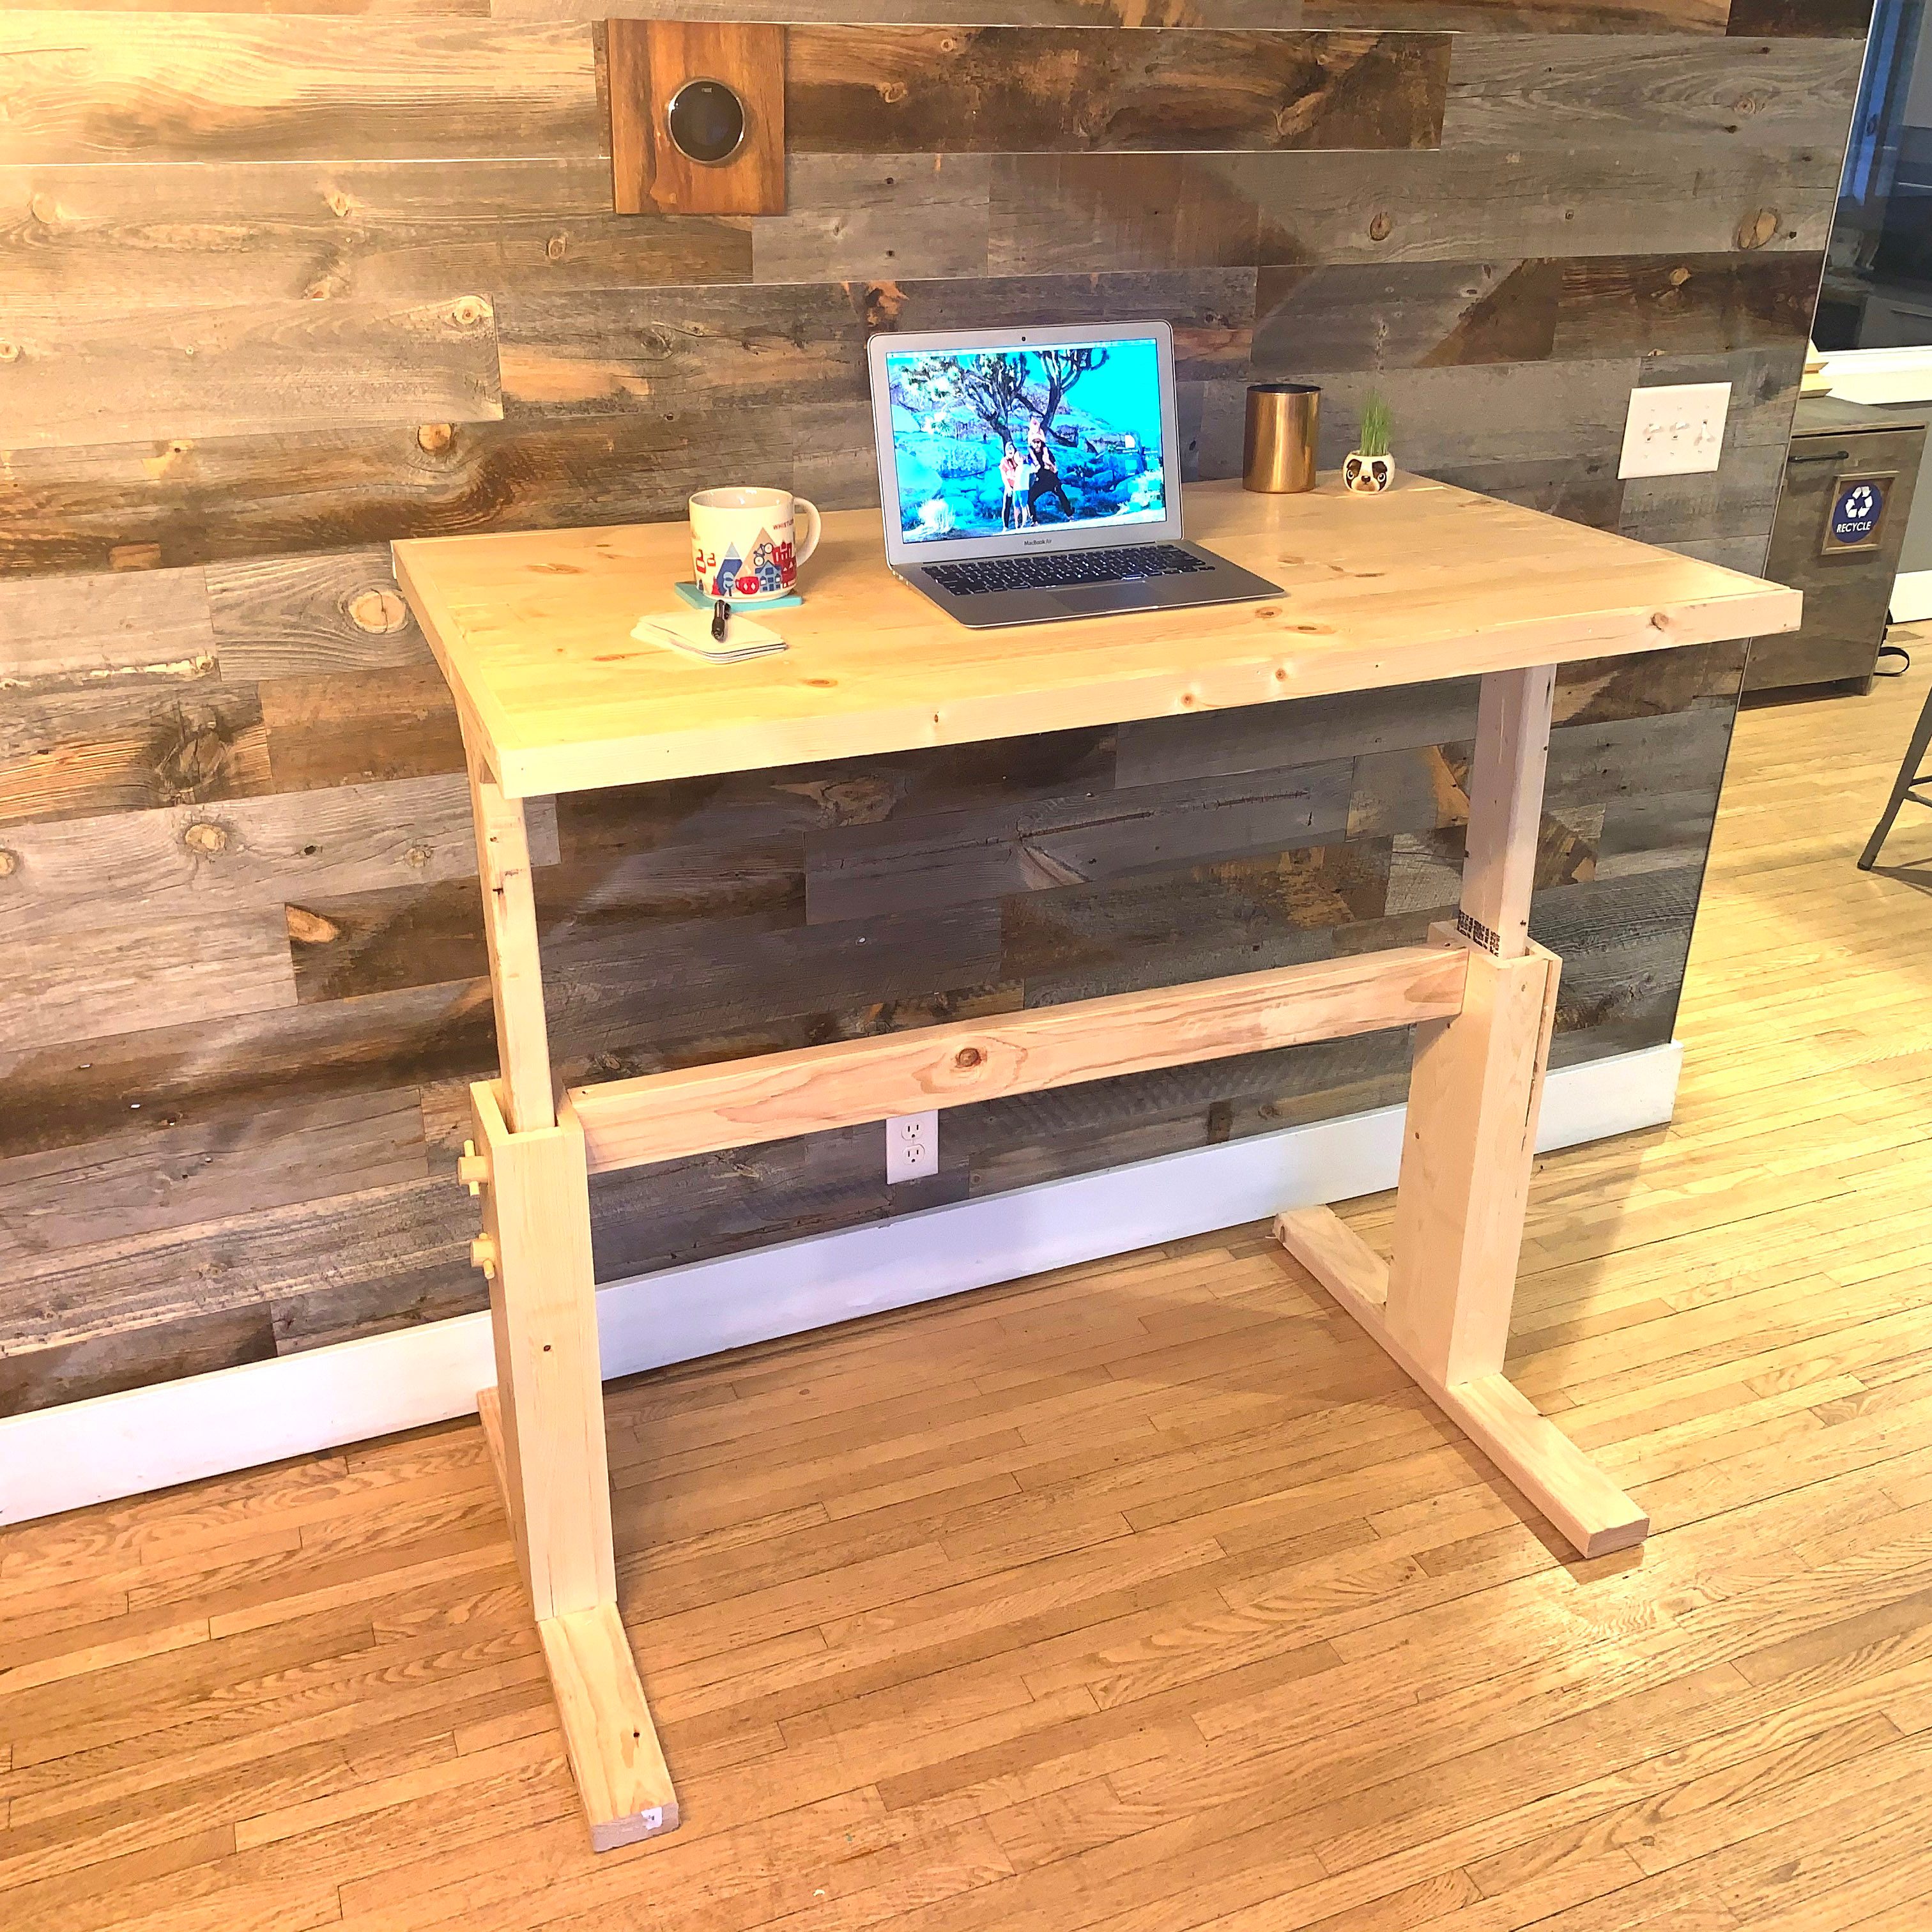 Sit or Stand: How to Make Your Own Adjustable DIY Desk | The Family